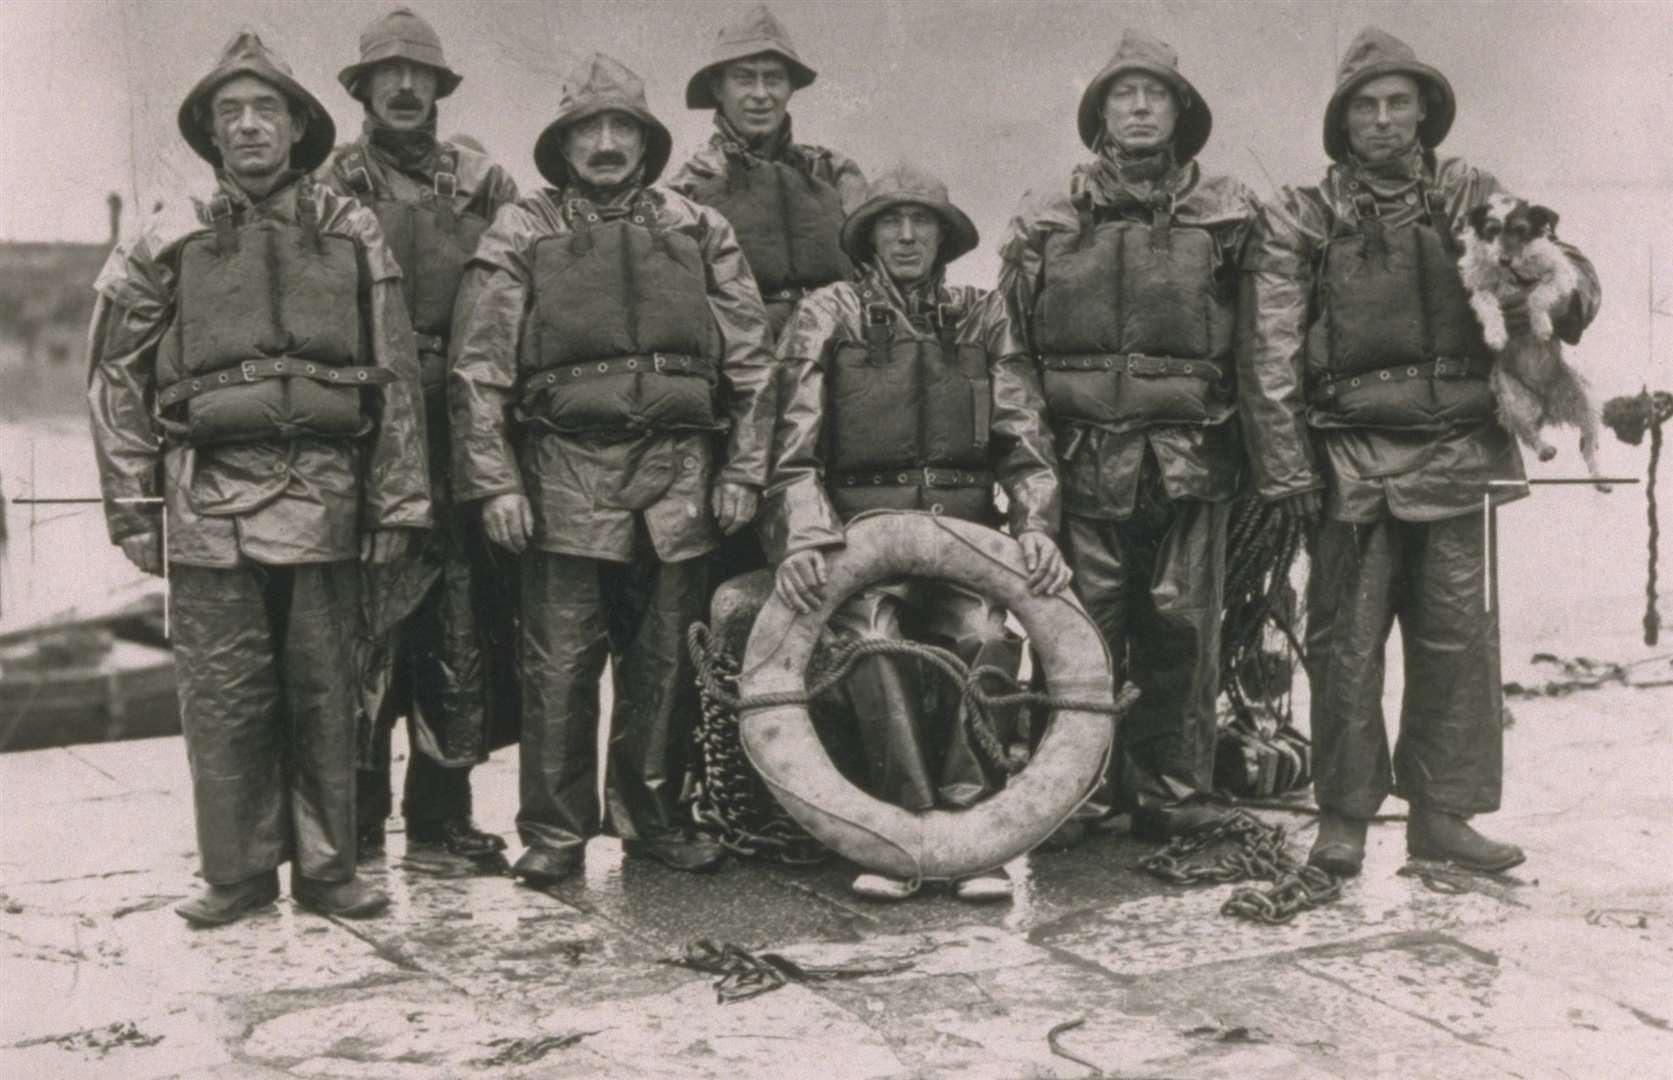 An RNLI crew pictured in their kit in 1936. Image: RNLI.